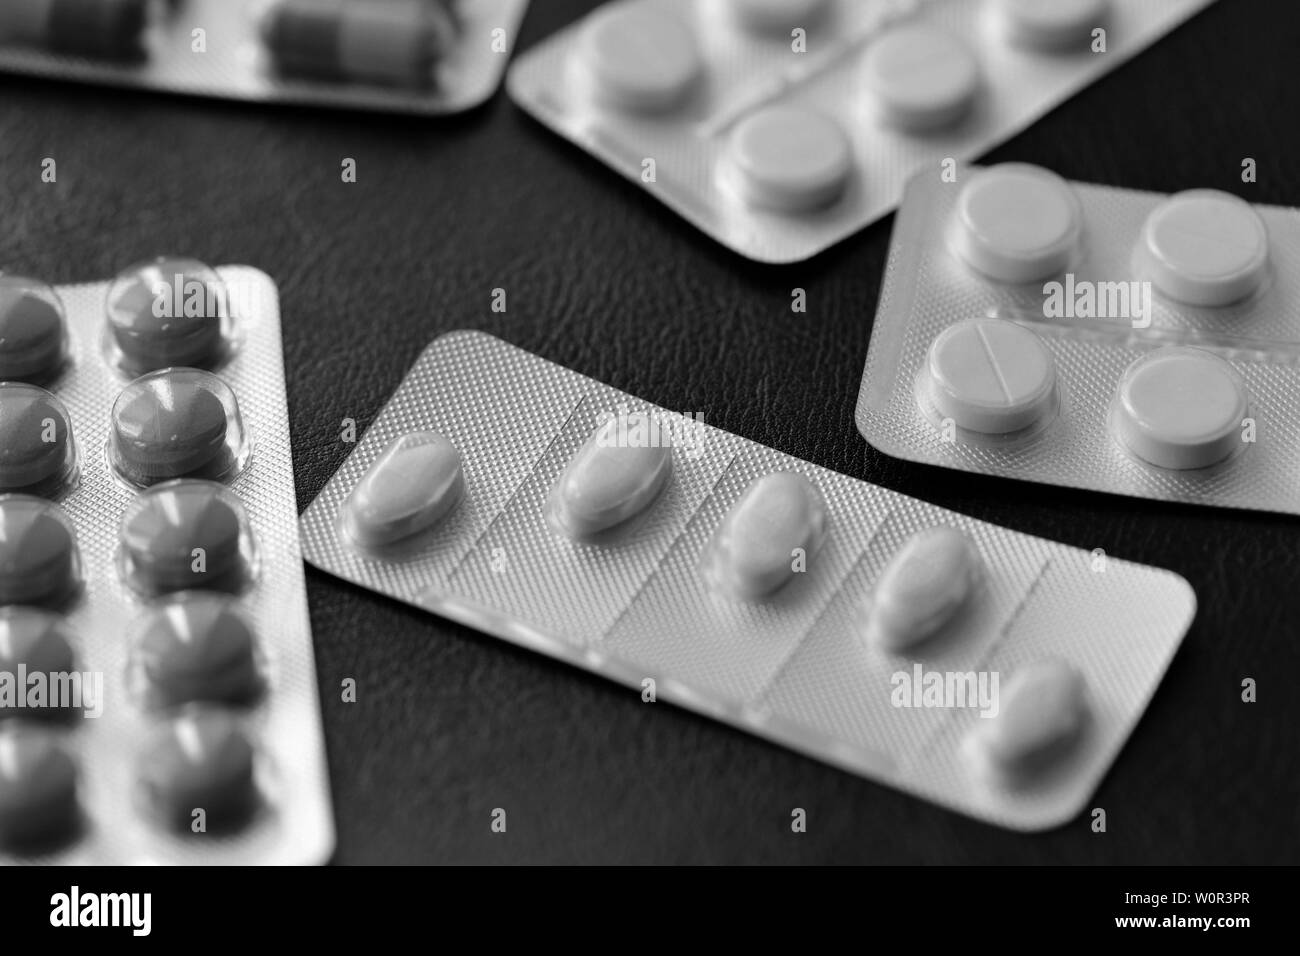 Pills and tablets blisters on a dark background close up black and white Stock Photo